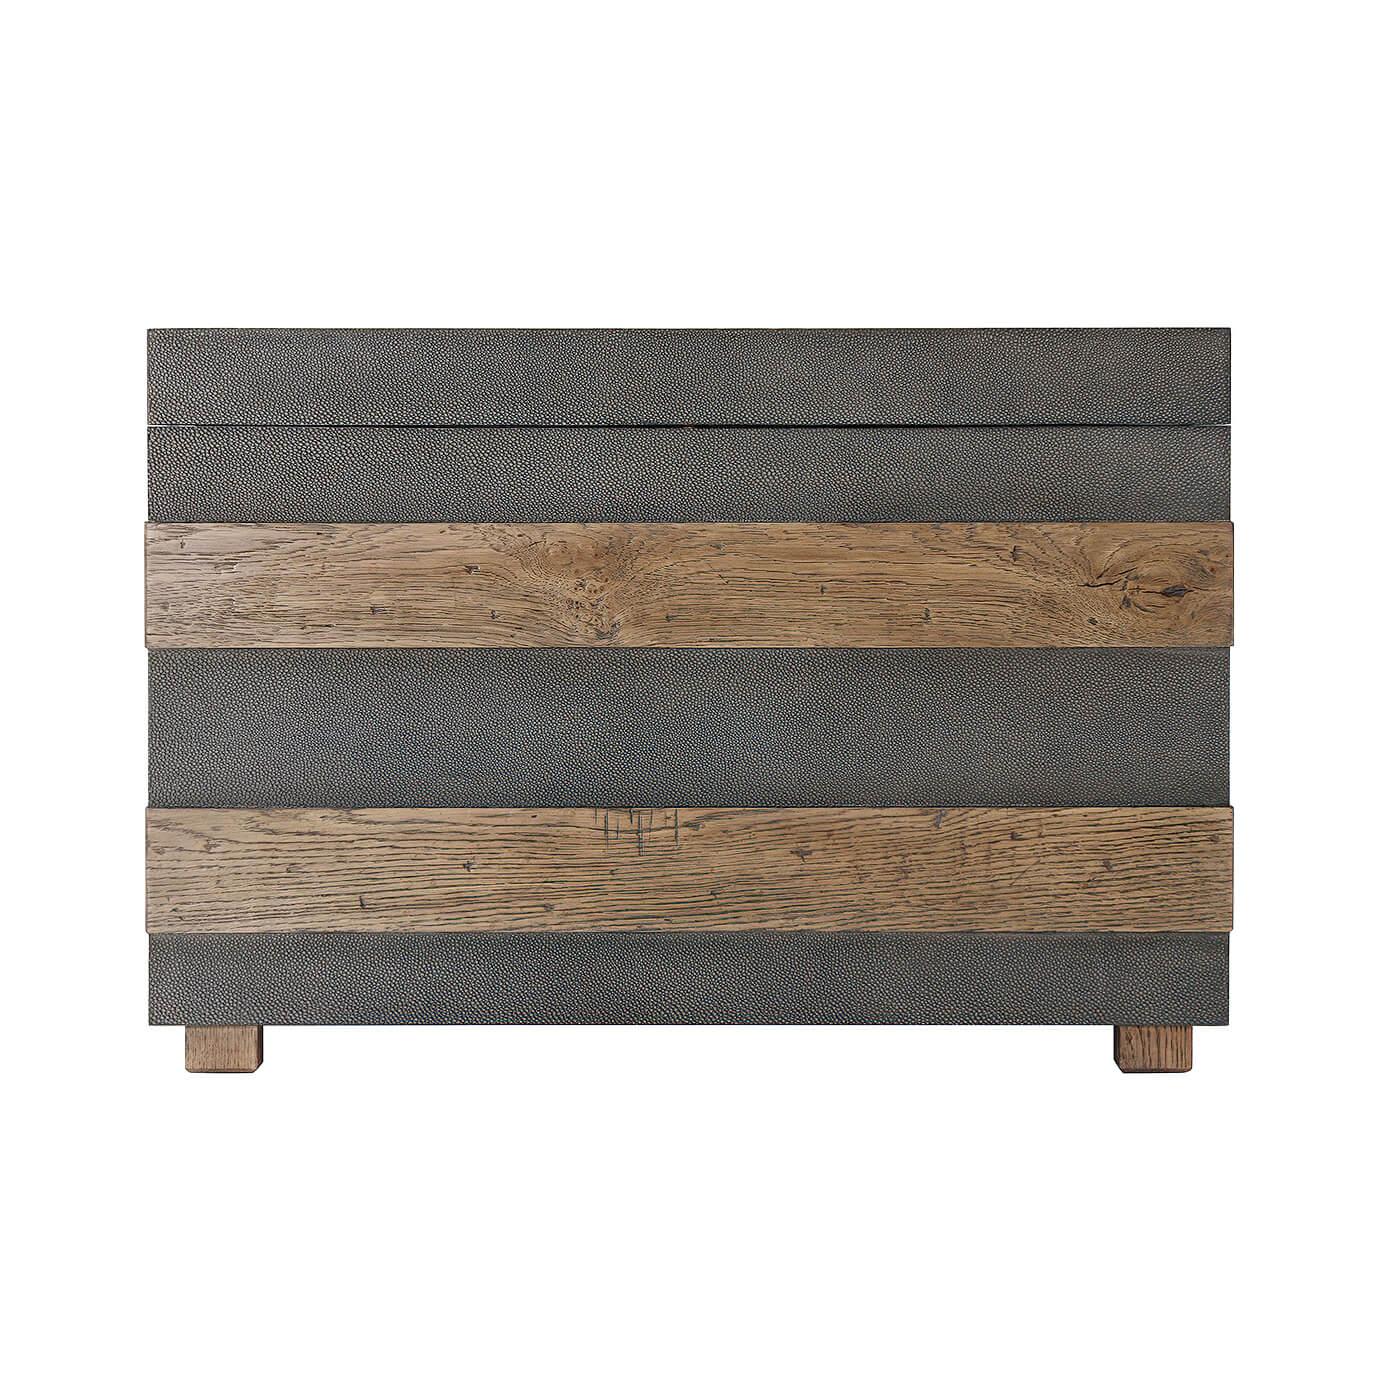 Vietnamese Leather Wrapped Trunk Coffee Table For Sale